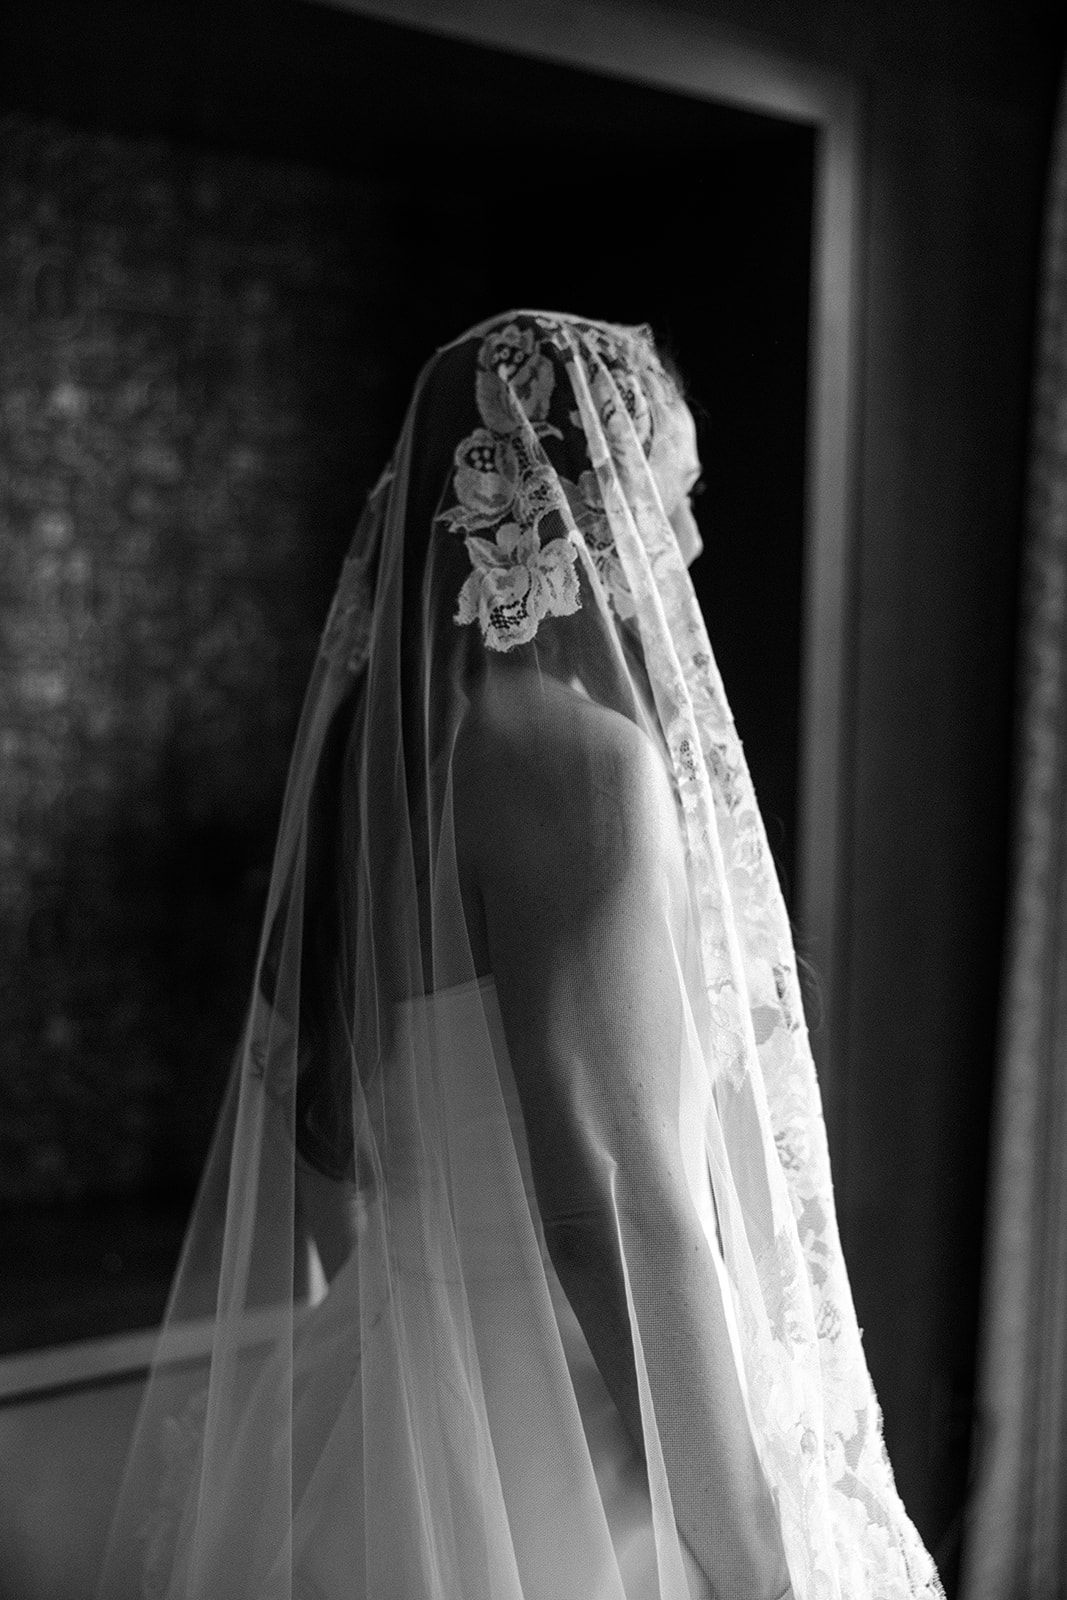 the lace veil over the bride's head